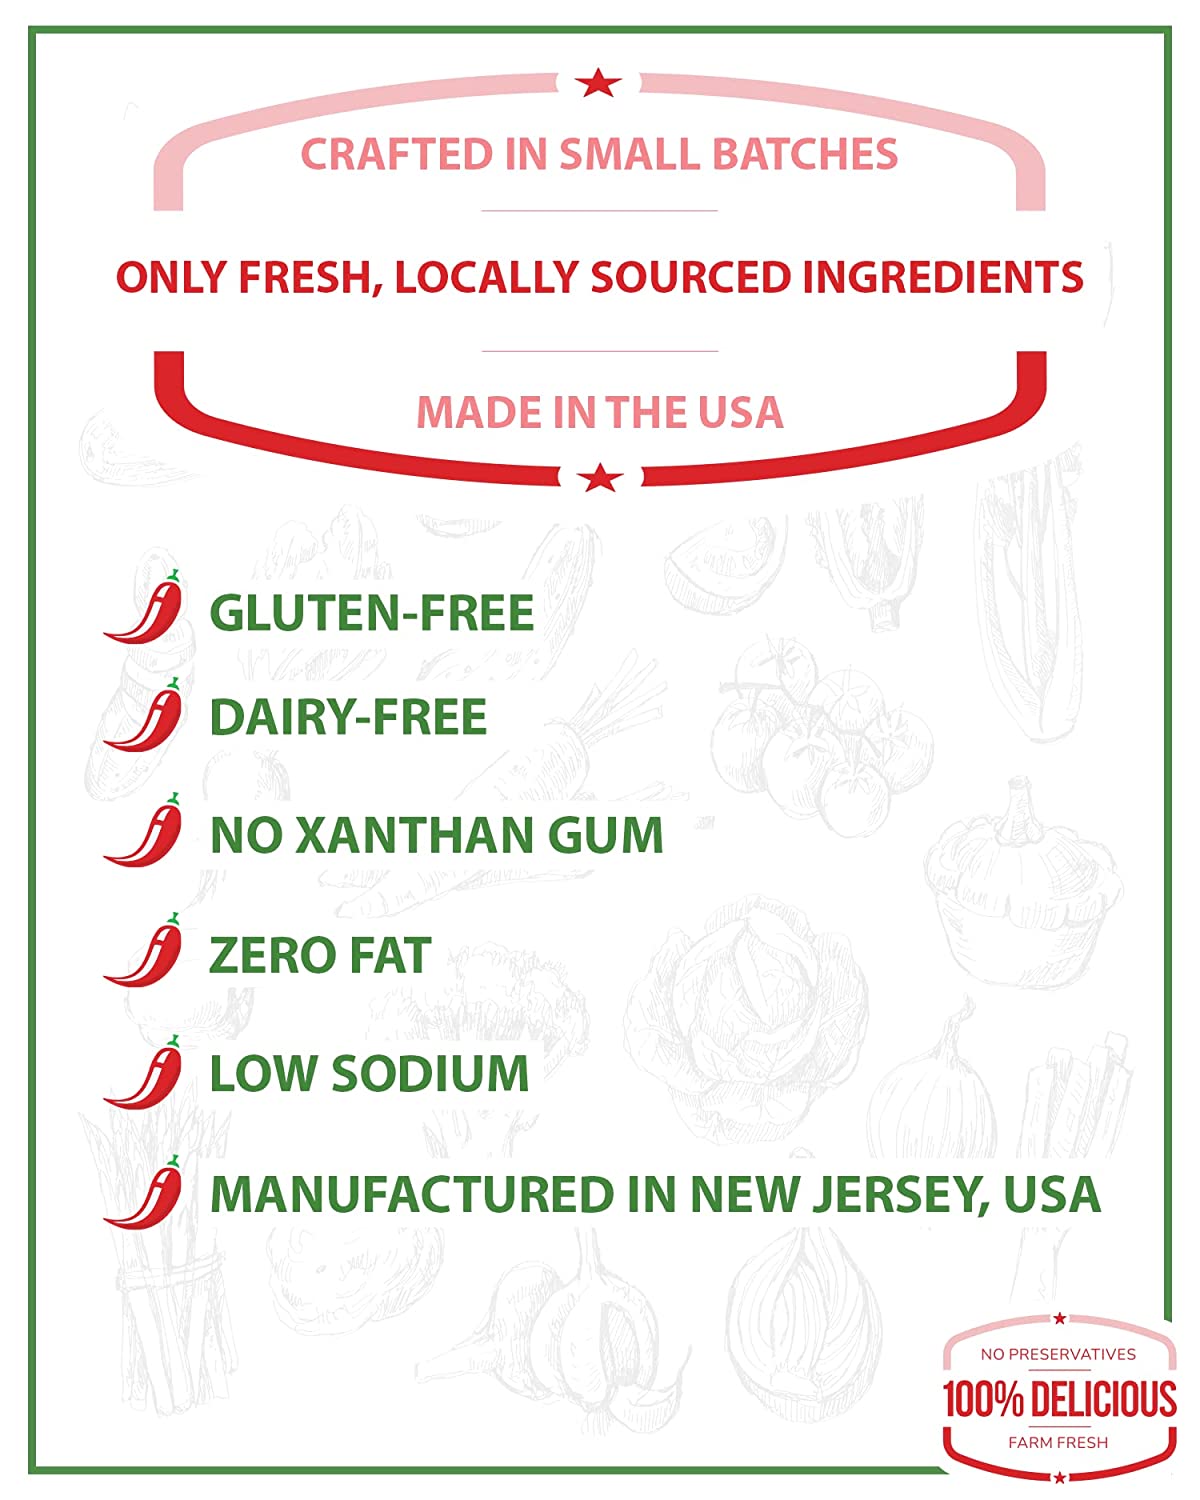 Locally Sourced, Gluten Free, Dairy Free, No Xanthan Gum, Low Sodium, zero Fat, Made in the USA - jersey girl hot sauce